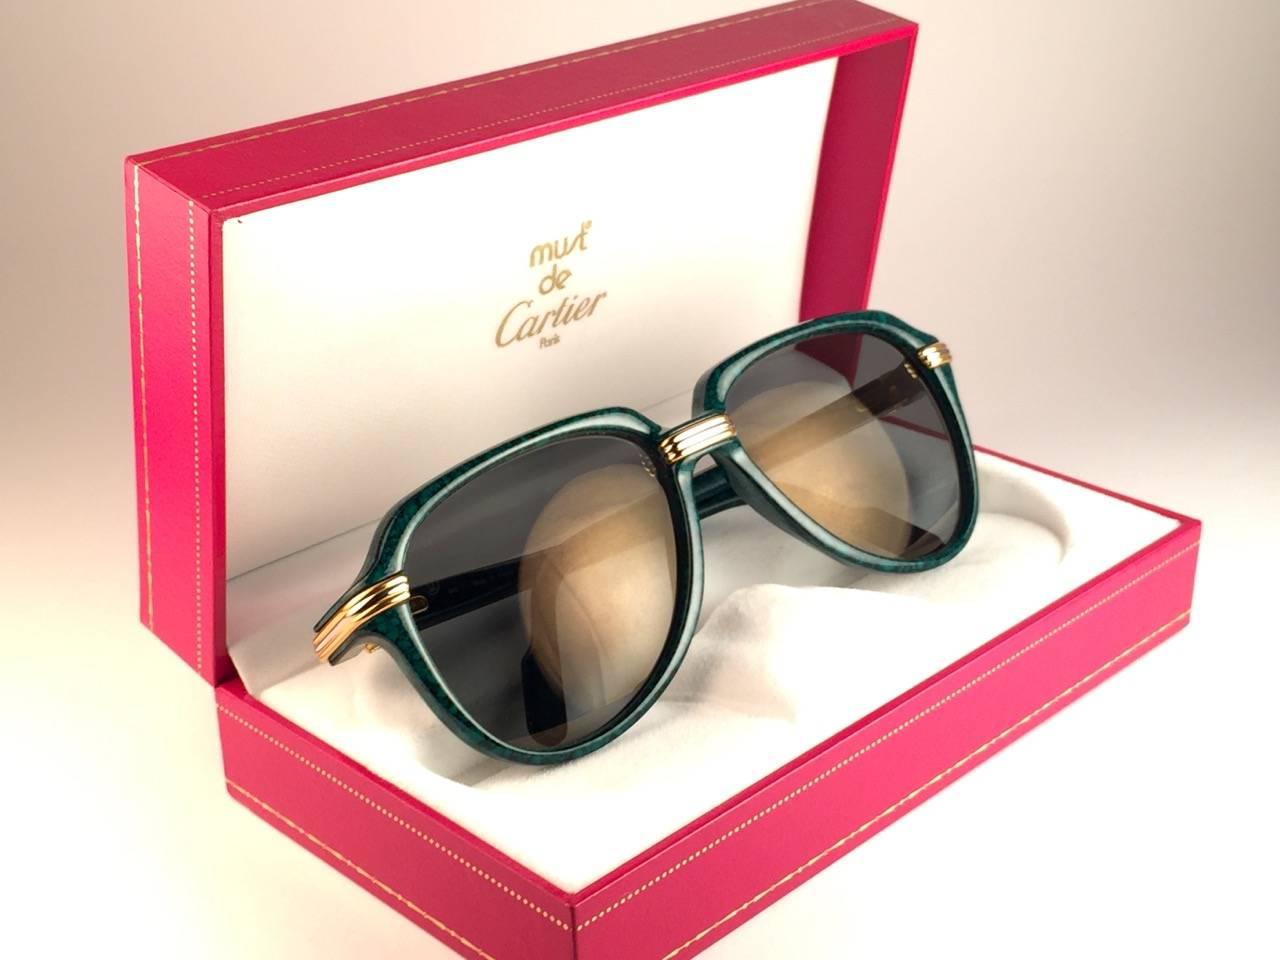 New Collectors Item. 
Unique and Rare Prototype Cartier Aviator Vitesse sunglasses, the Marbled Green Edition with yellow and white gold accents.
Frame is with the sides in gold and white hard plated gold. All hallmarks. Cartier gold signs on the